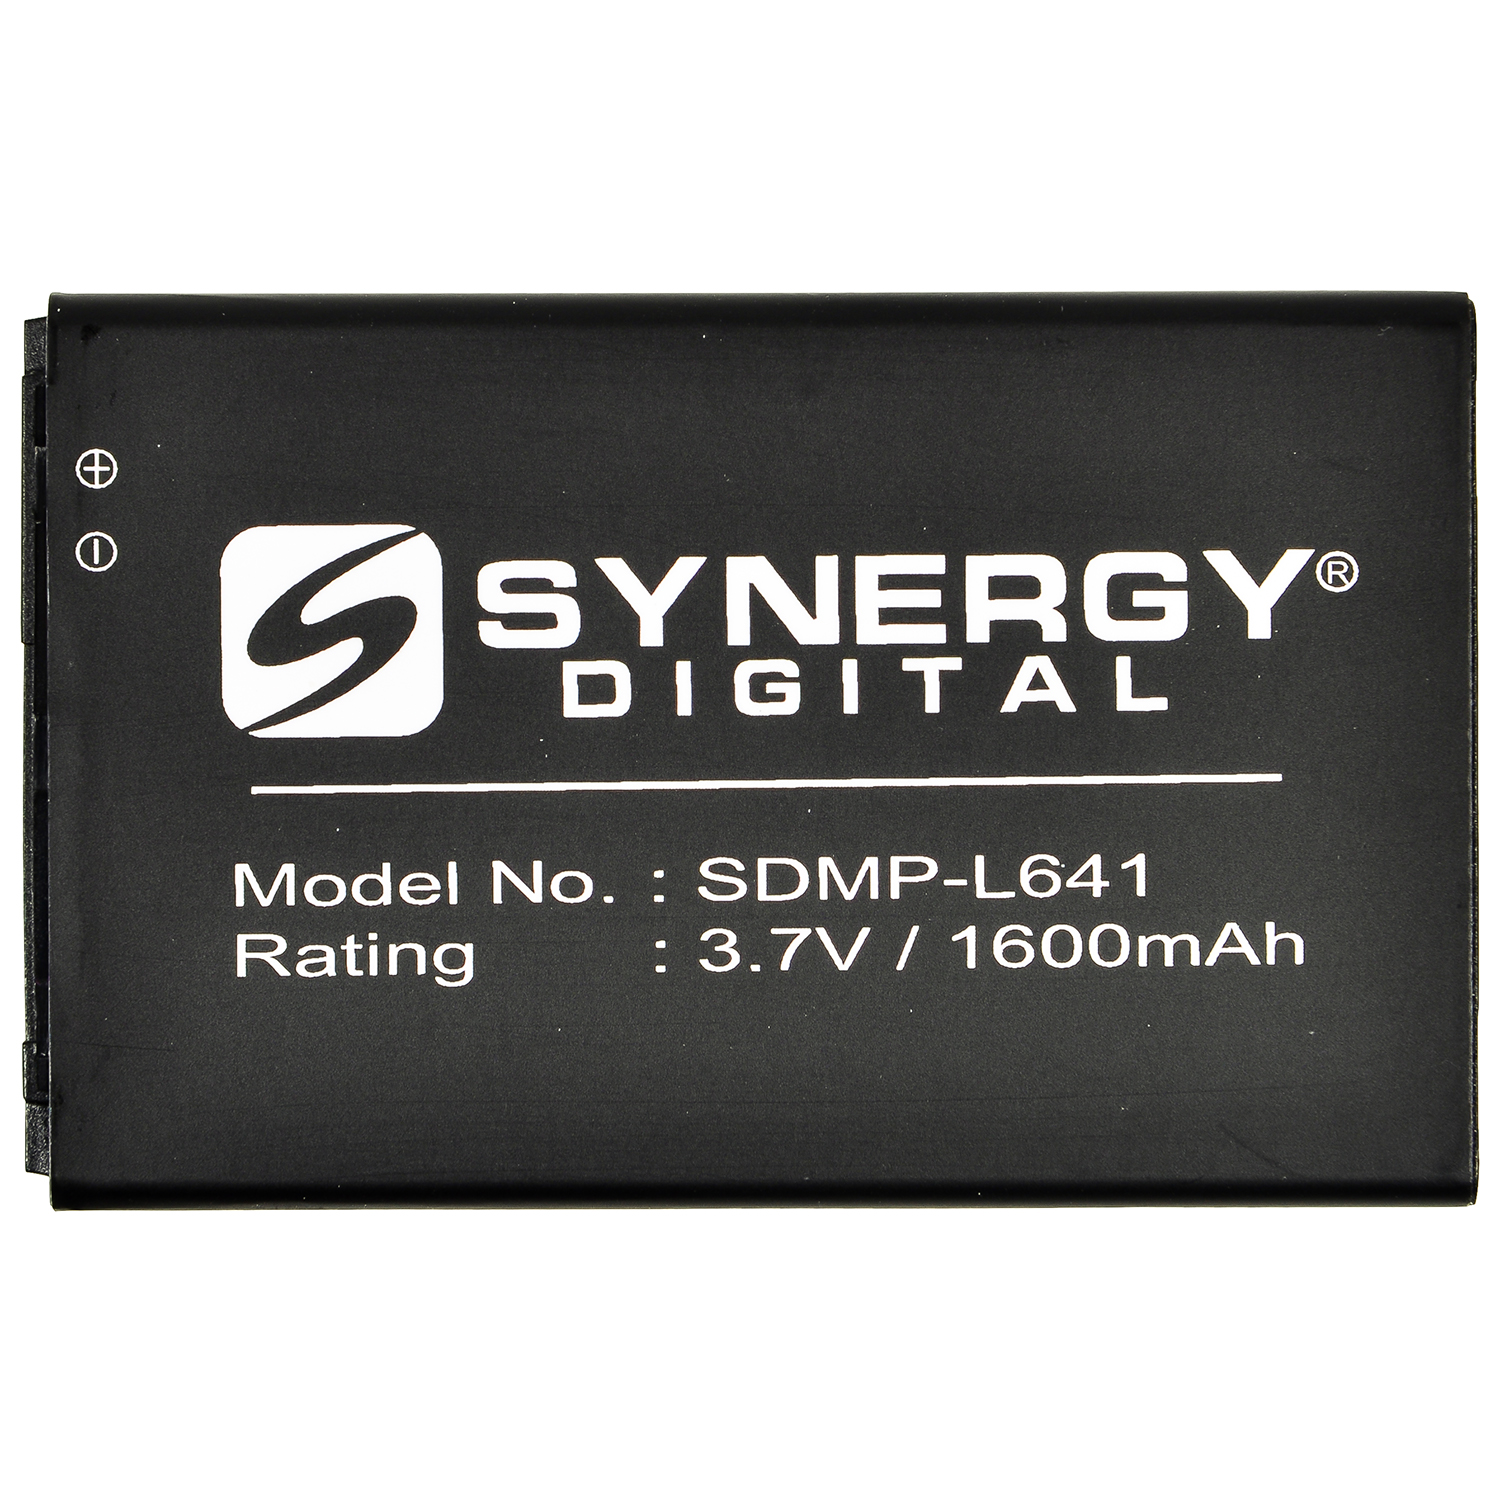 SDMP-L641 - Rechargeable Ultra High Capacity (Li-Ion 3.7V 1600mAh) - Replacement For LG BL-41A1H Cellphone Battery